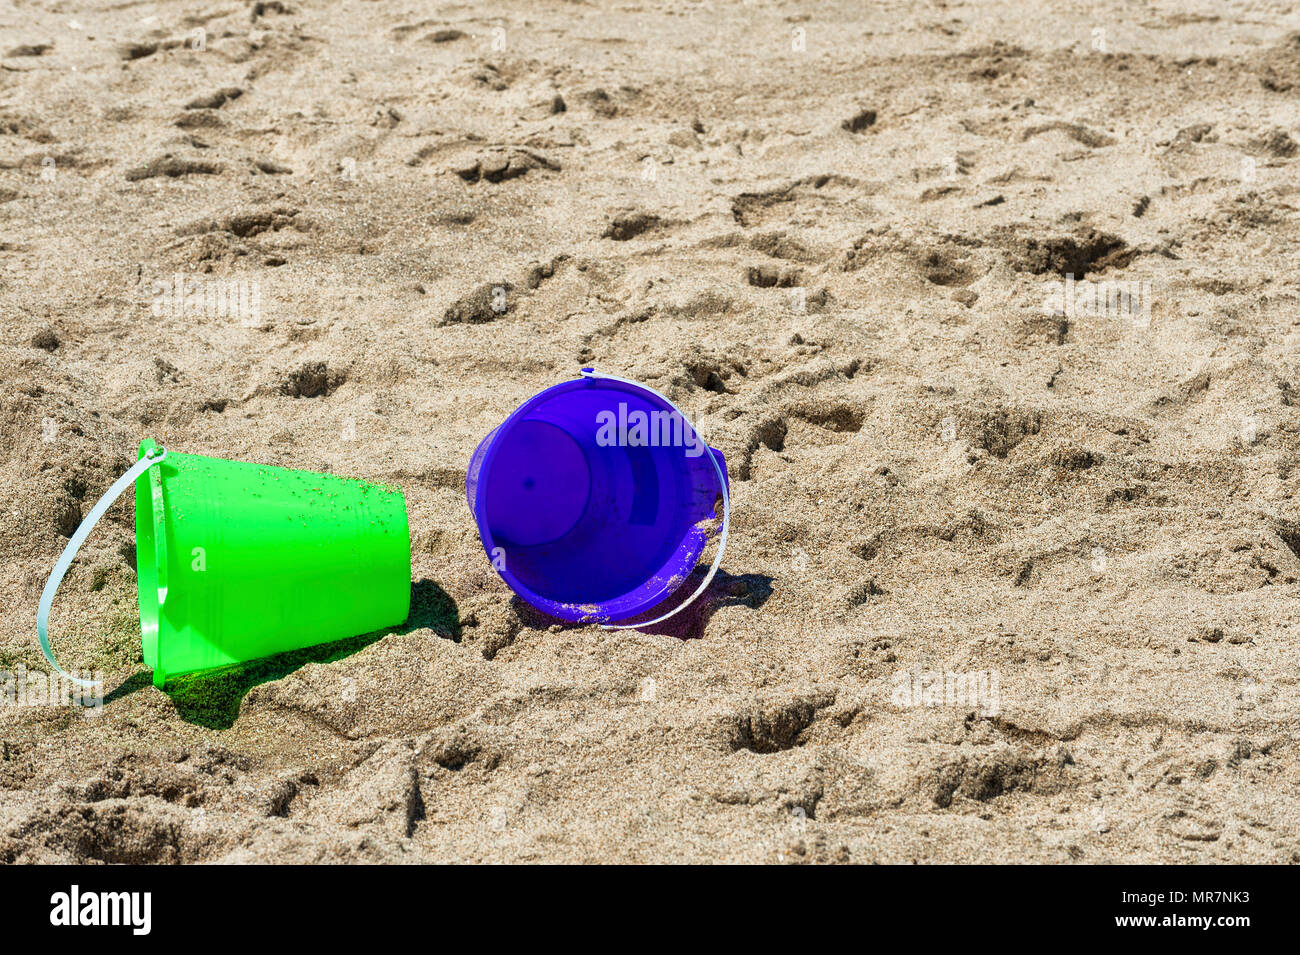 Closeup and copyspace of two play buckets one green the other purple left lying on sandy beach Stock Photo